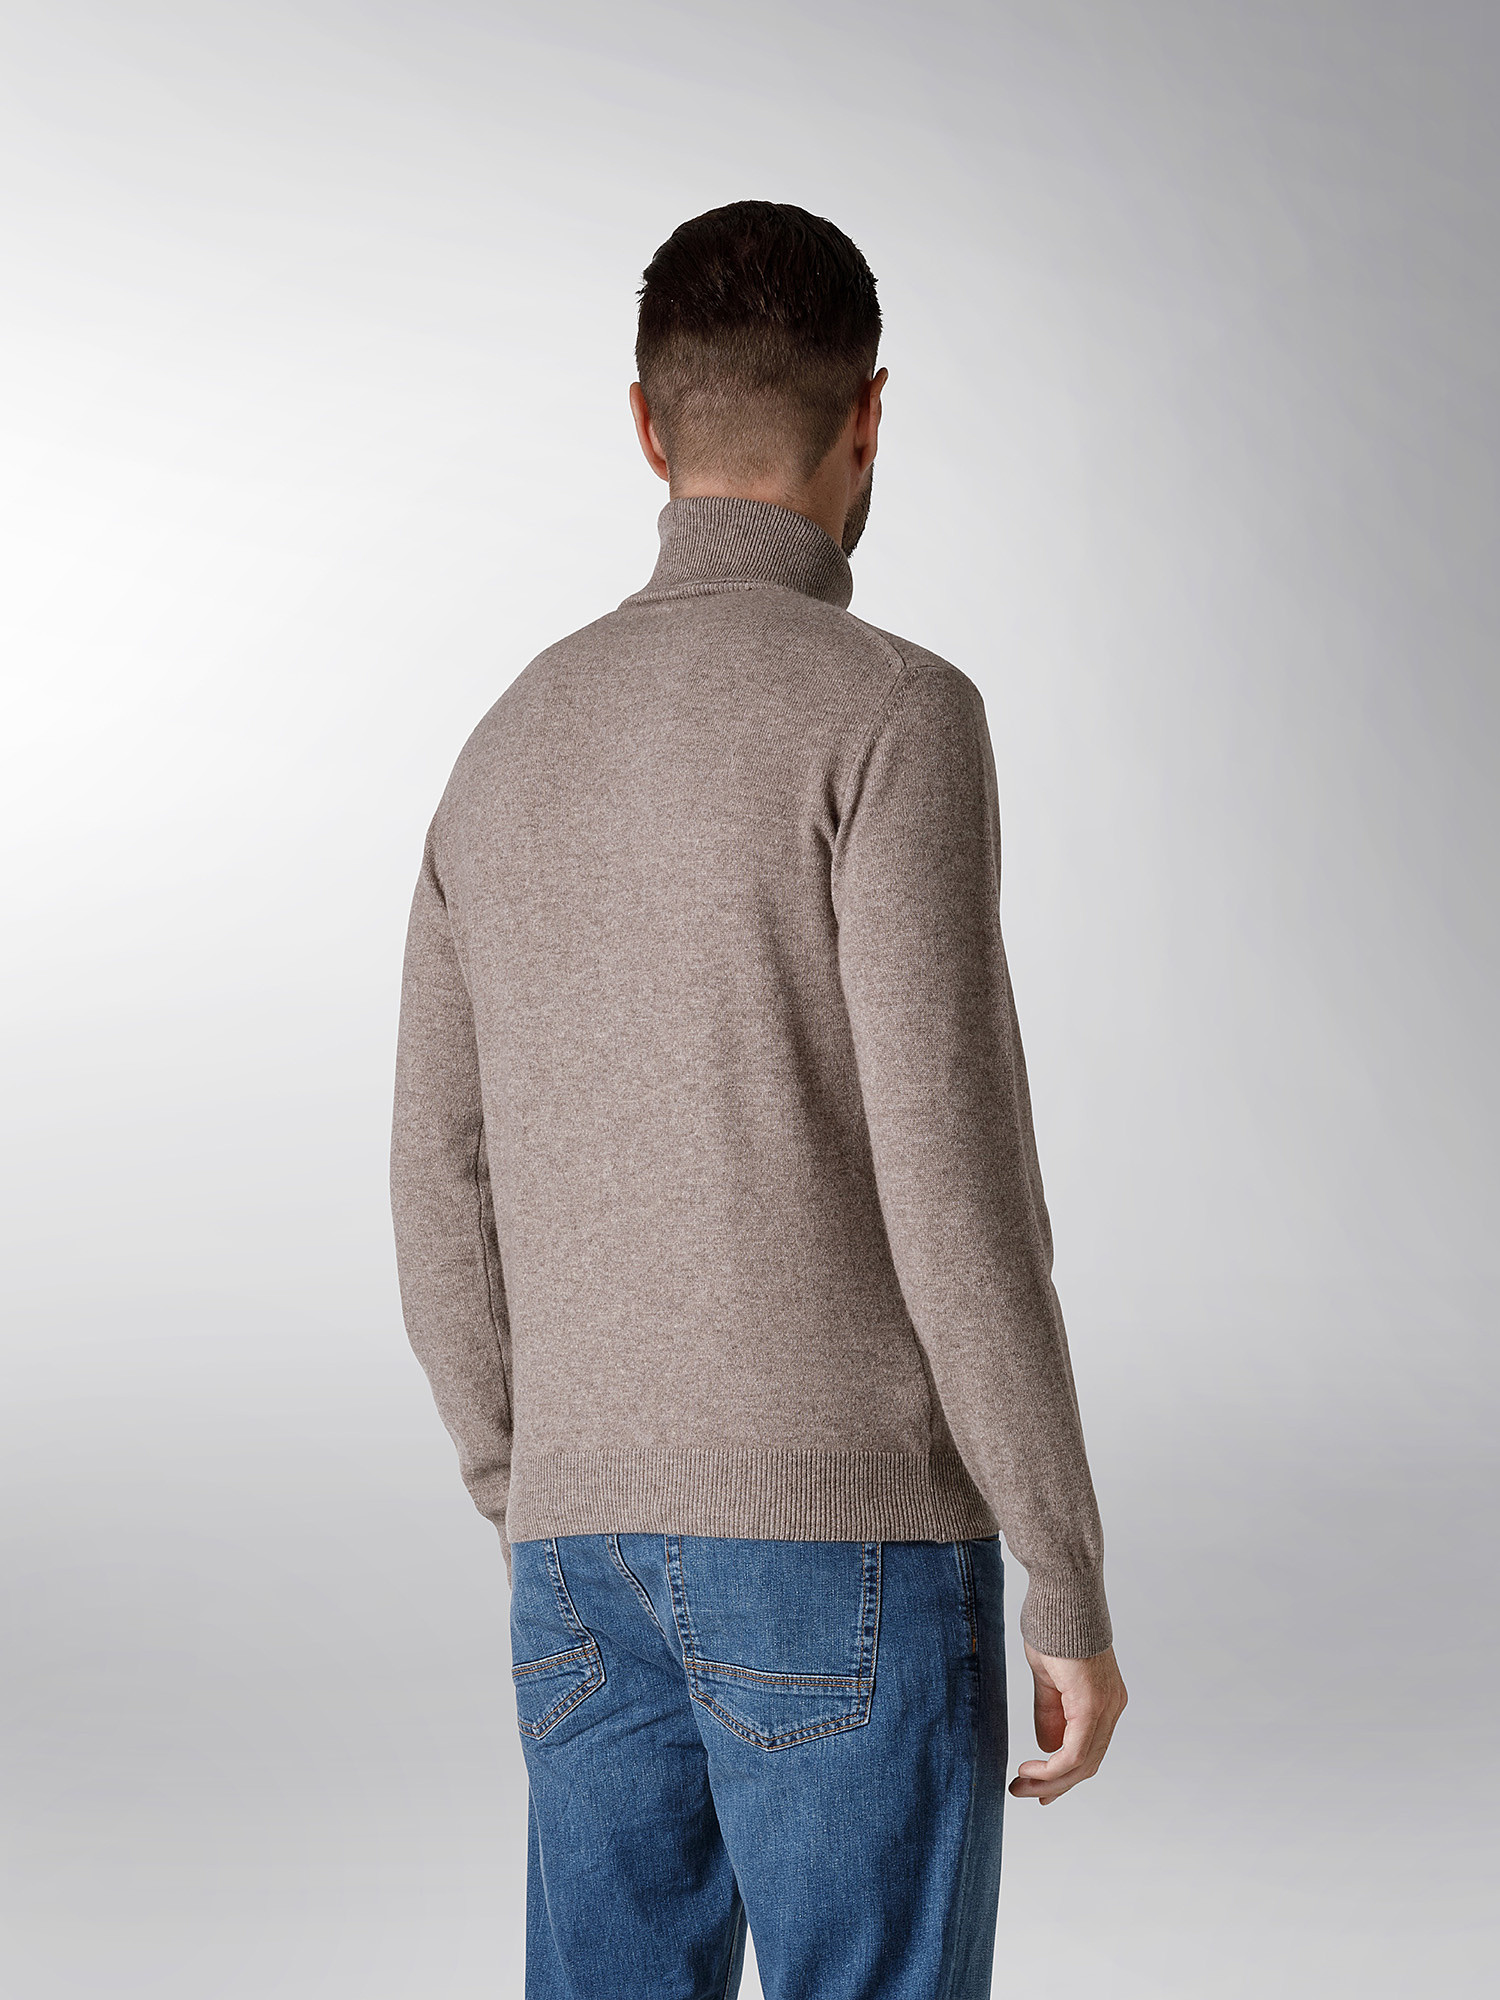 Coin Cashmere - Turtleneck in pure cashmere, Taupe Grey, large image number 2